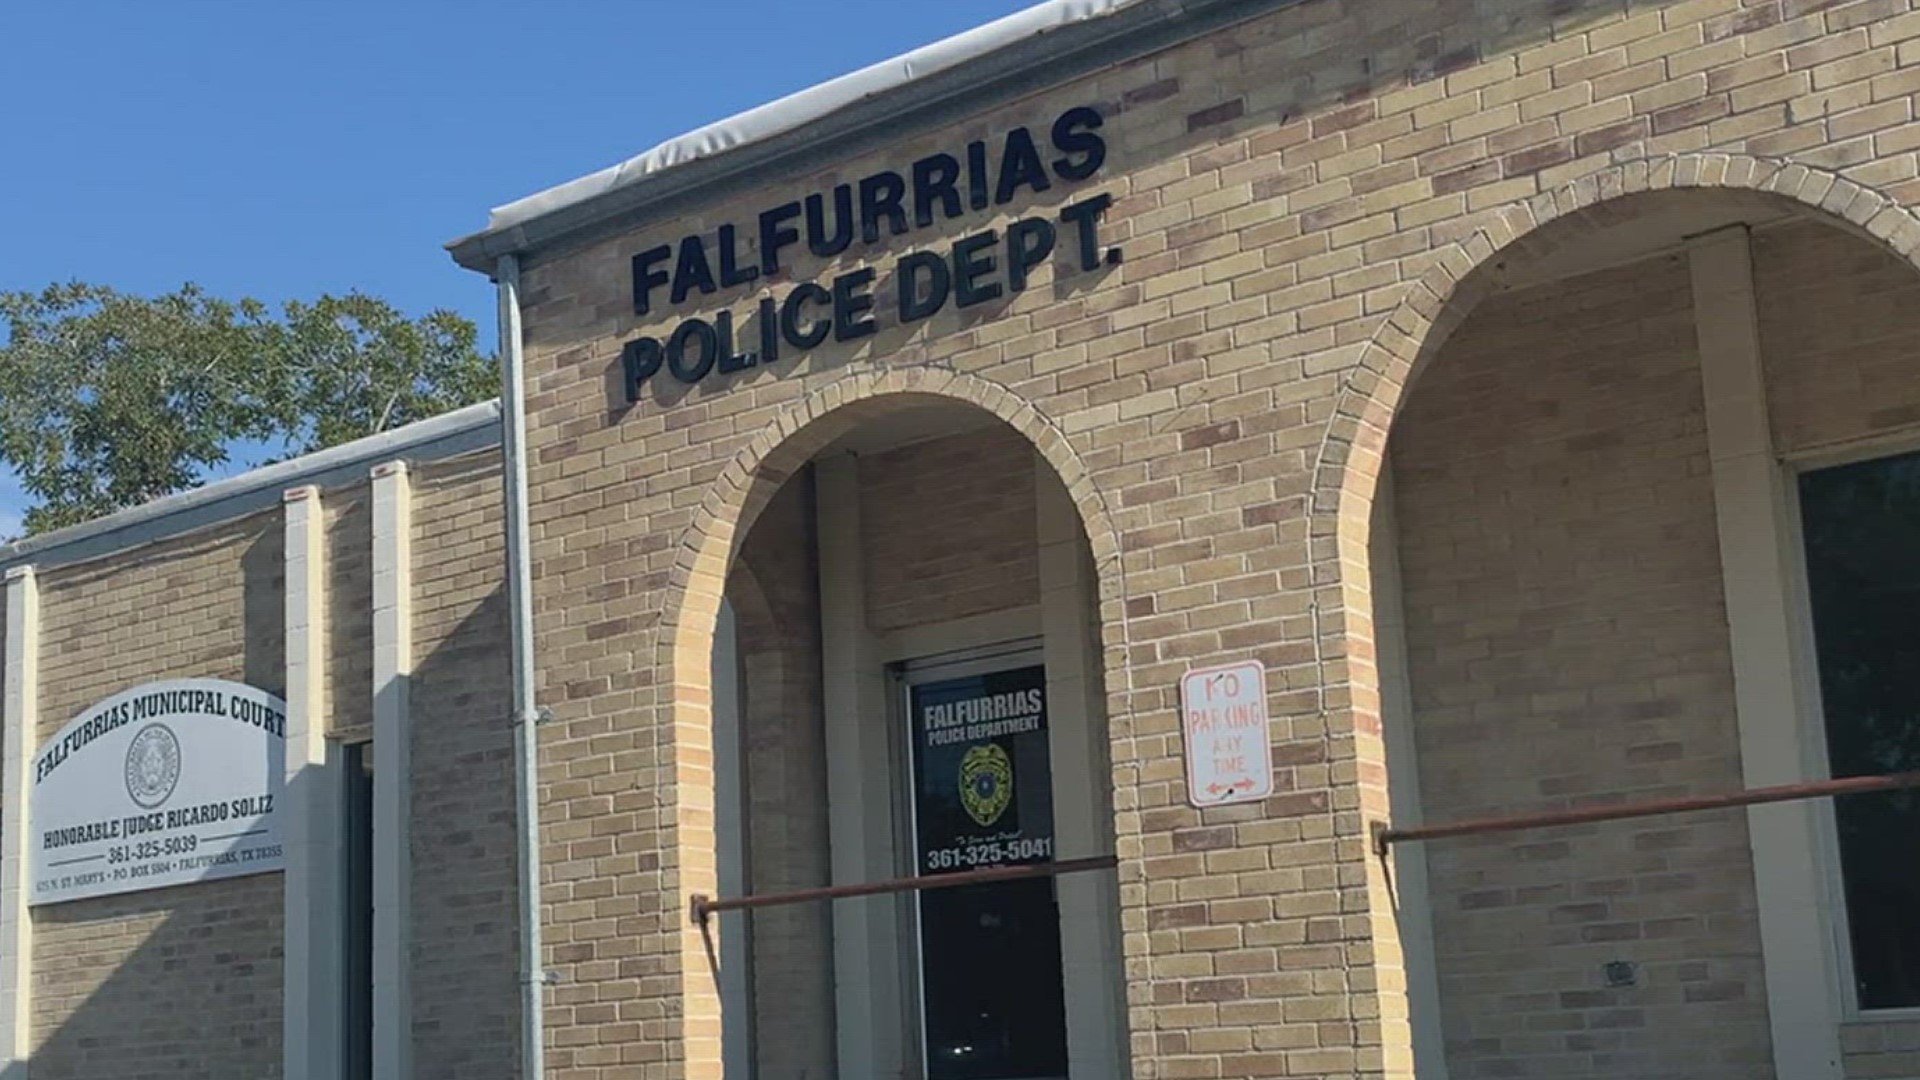 Garcia has been patrolling the streets of Falfurrias for 3 years. While he is not from the area, he did tell 3NEWS that he enjoys being a part of the community.